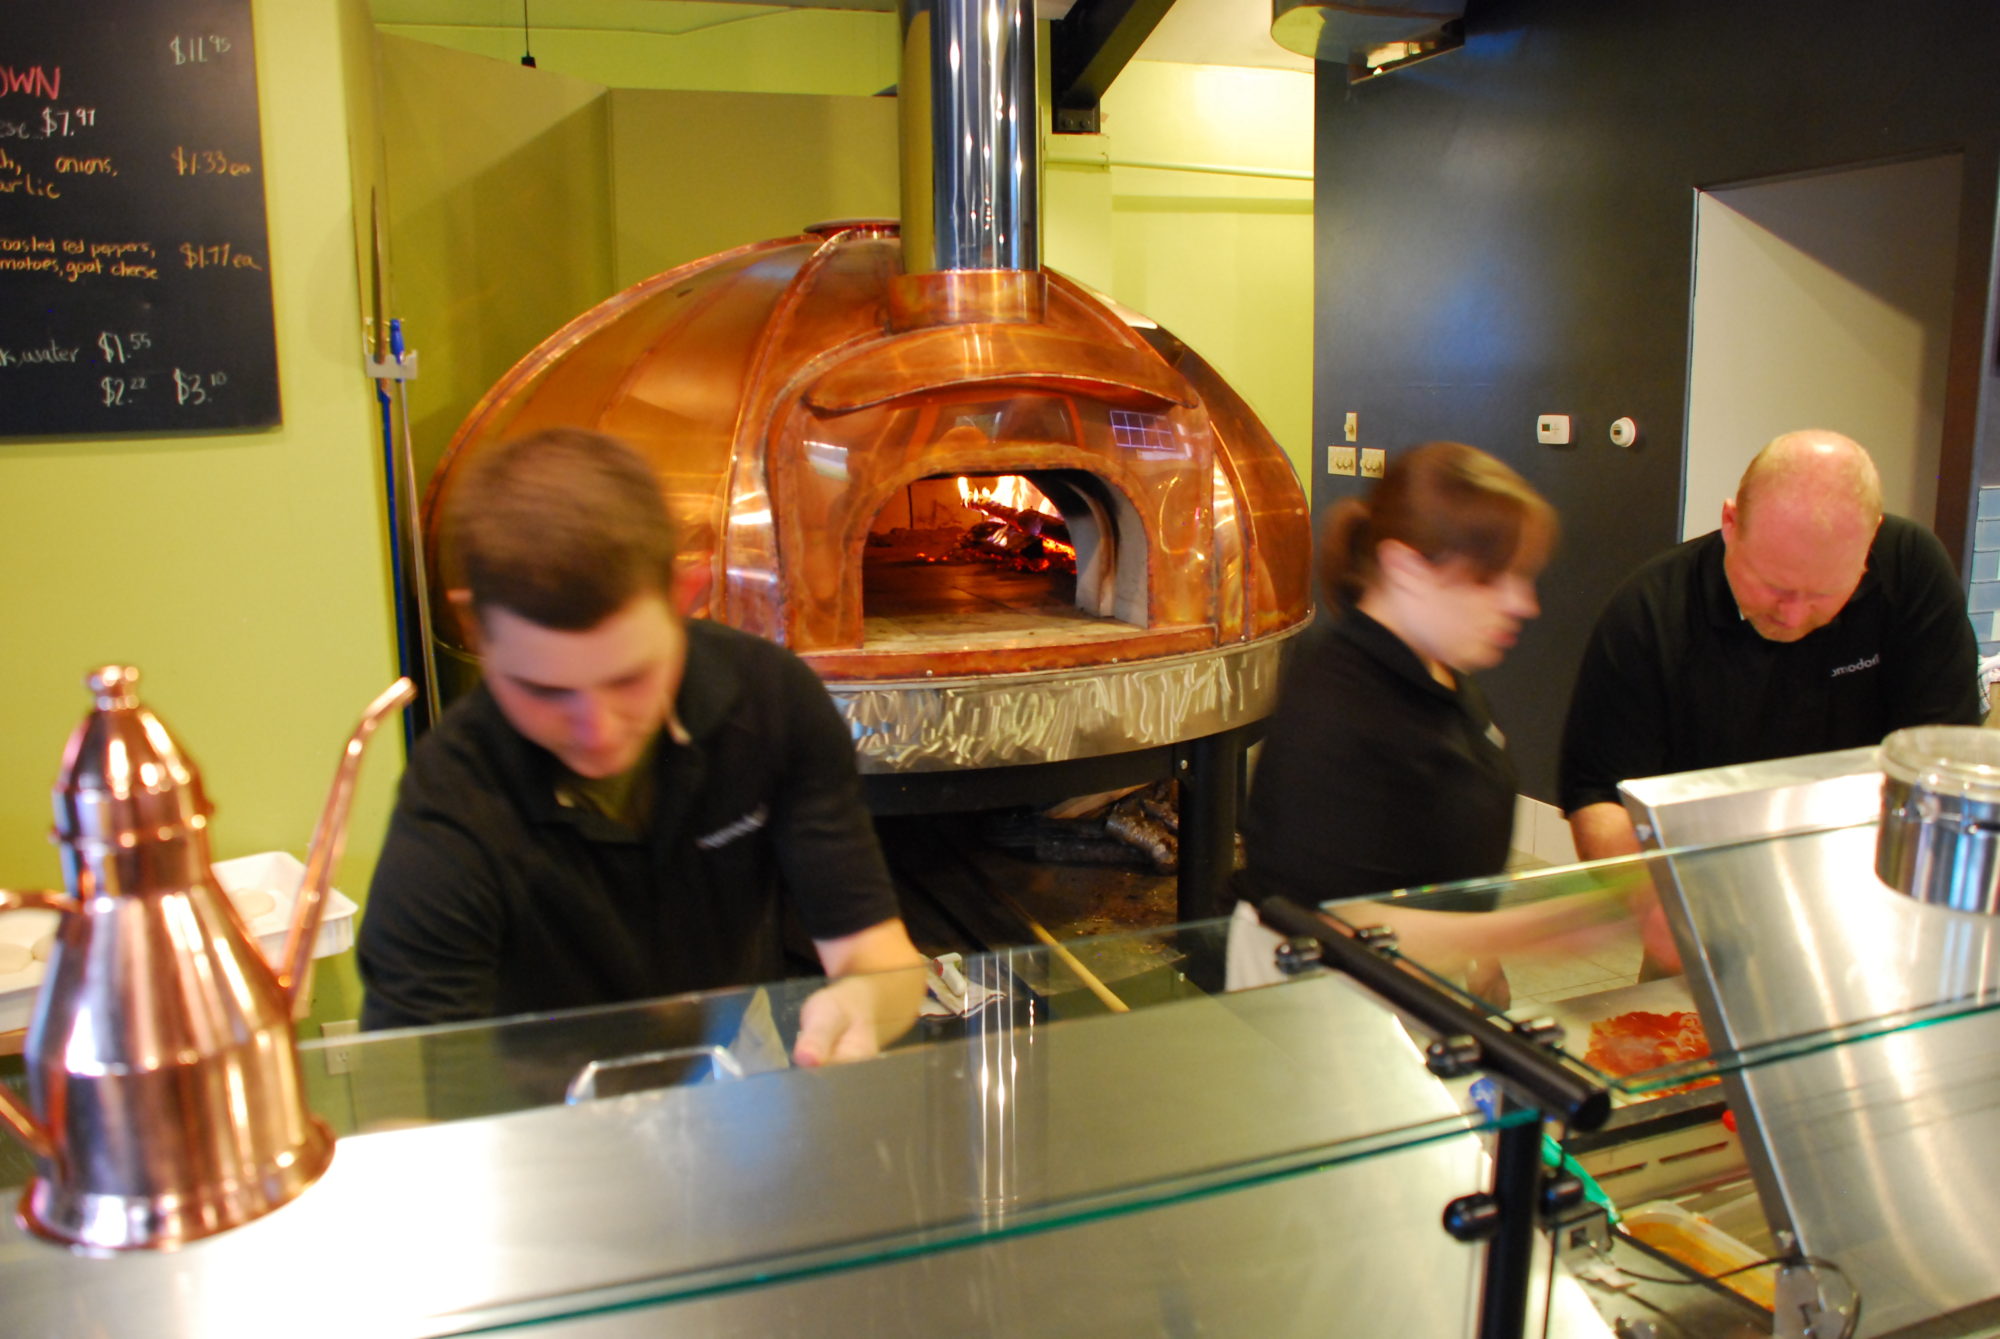 Starting a wood fired bakery or pizzeria?